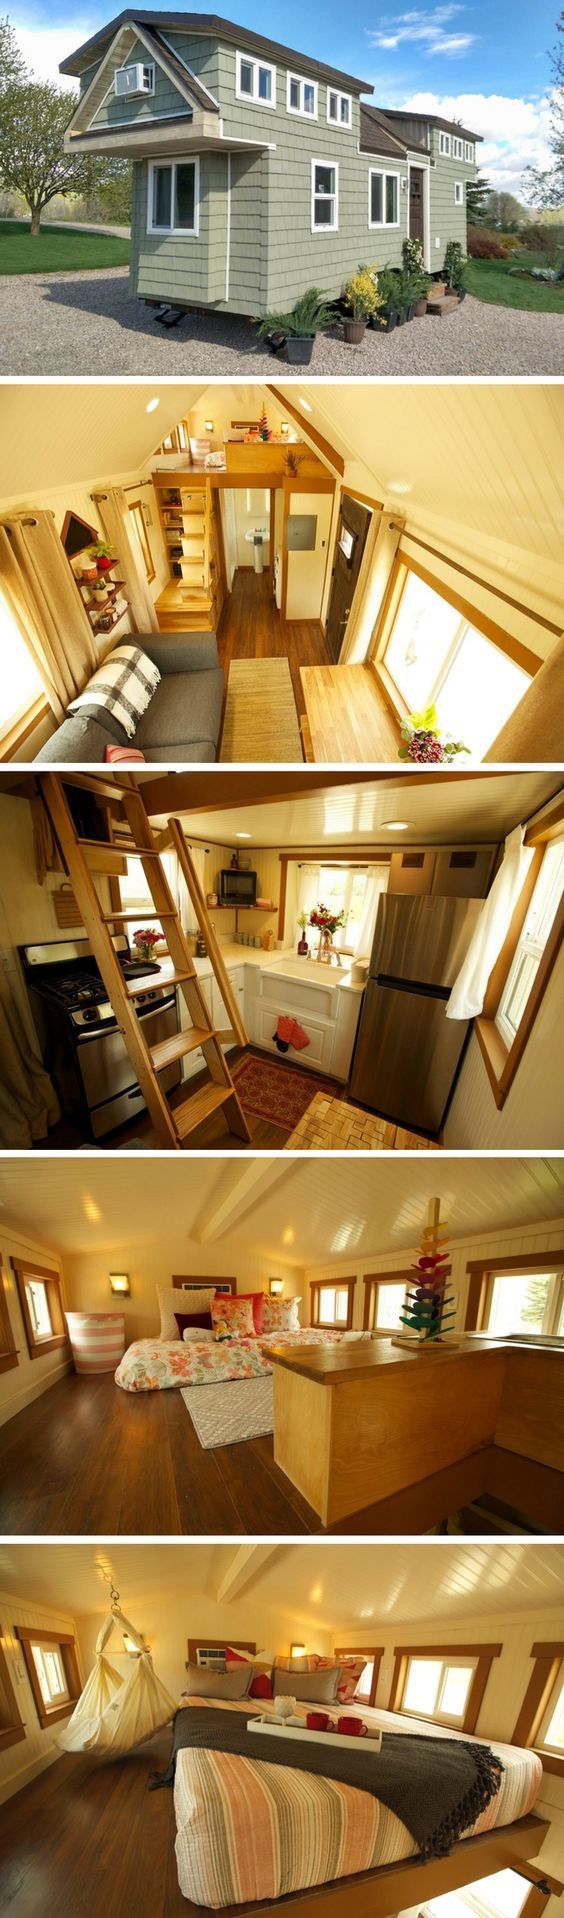 This beautiful, 200 sq ft tiny house was designed and built for a young family.  The home was created by Maximus Extreme Living